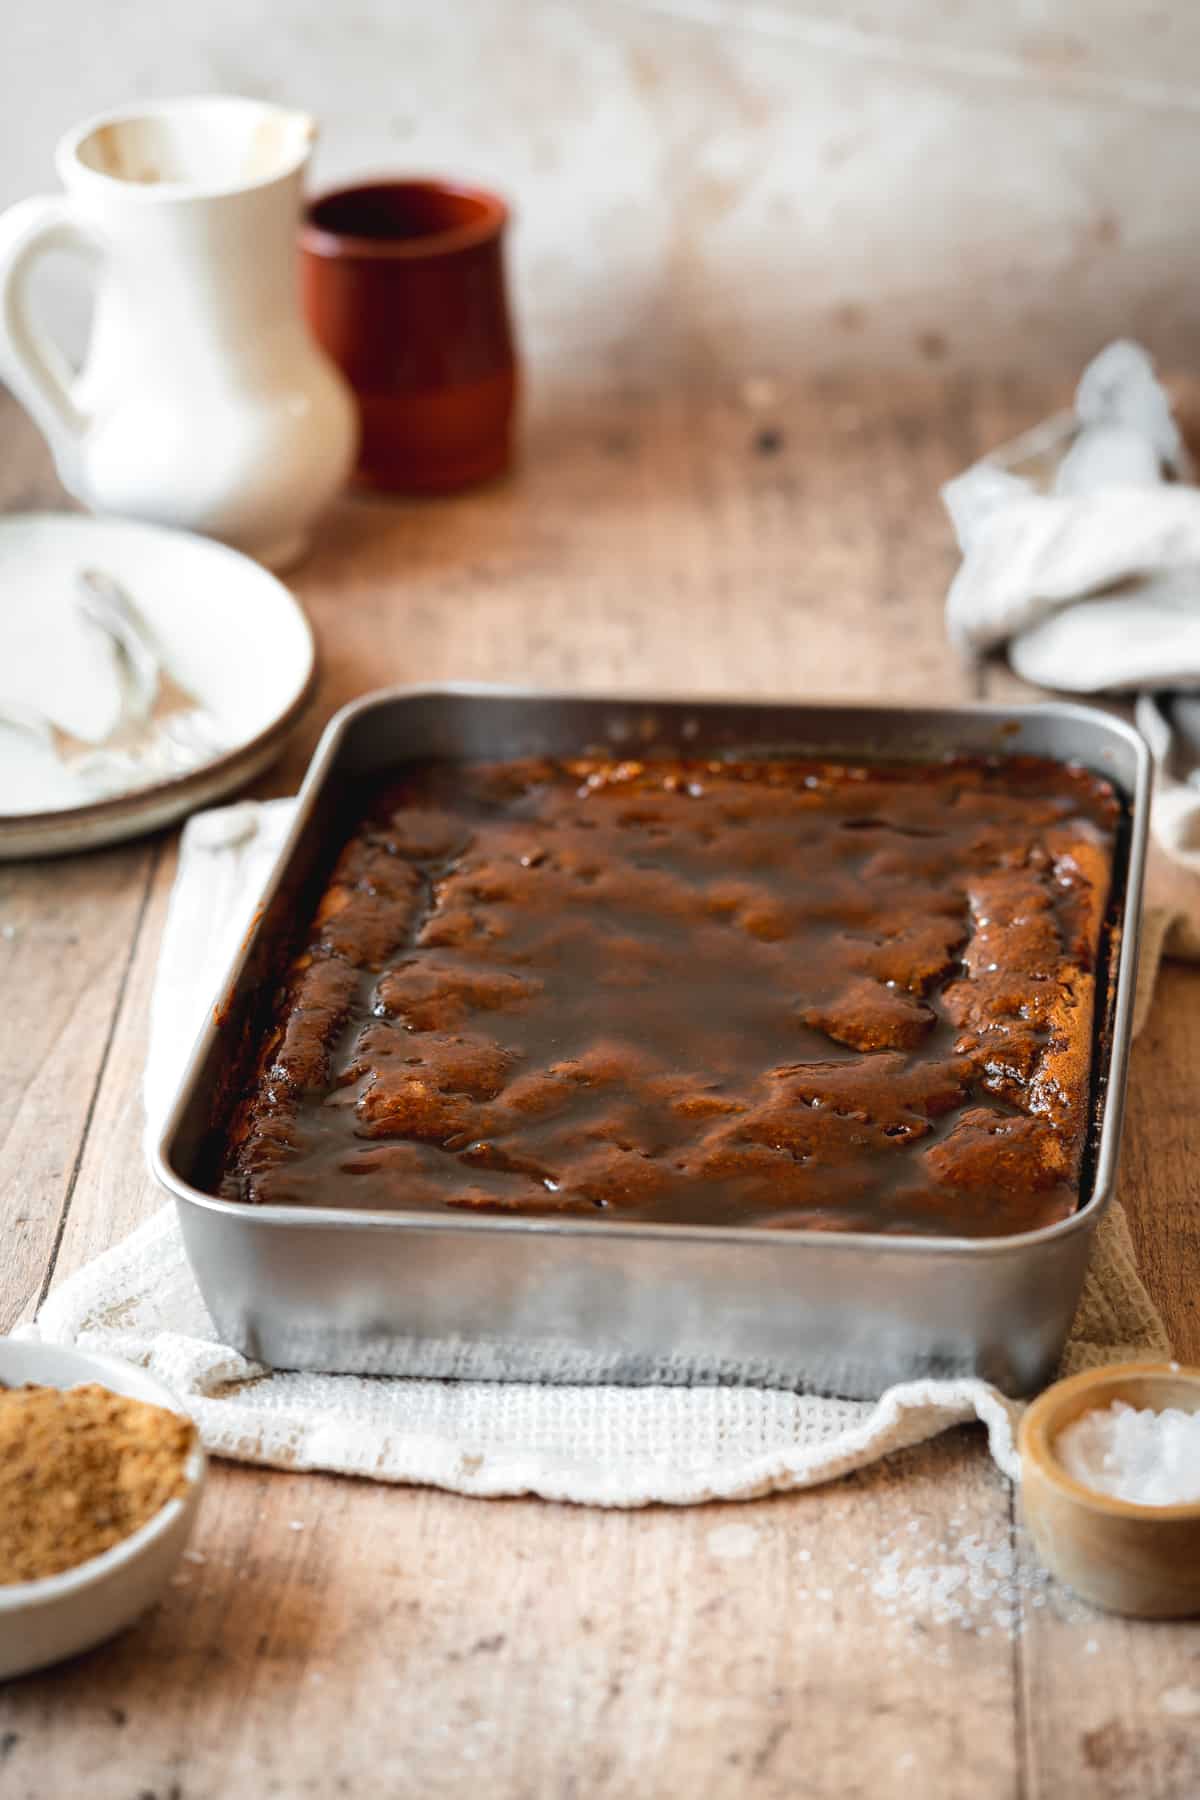 sticky toffee pudding in a rectangular metal pan on a wooden surface.